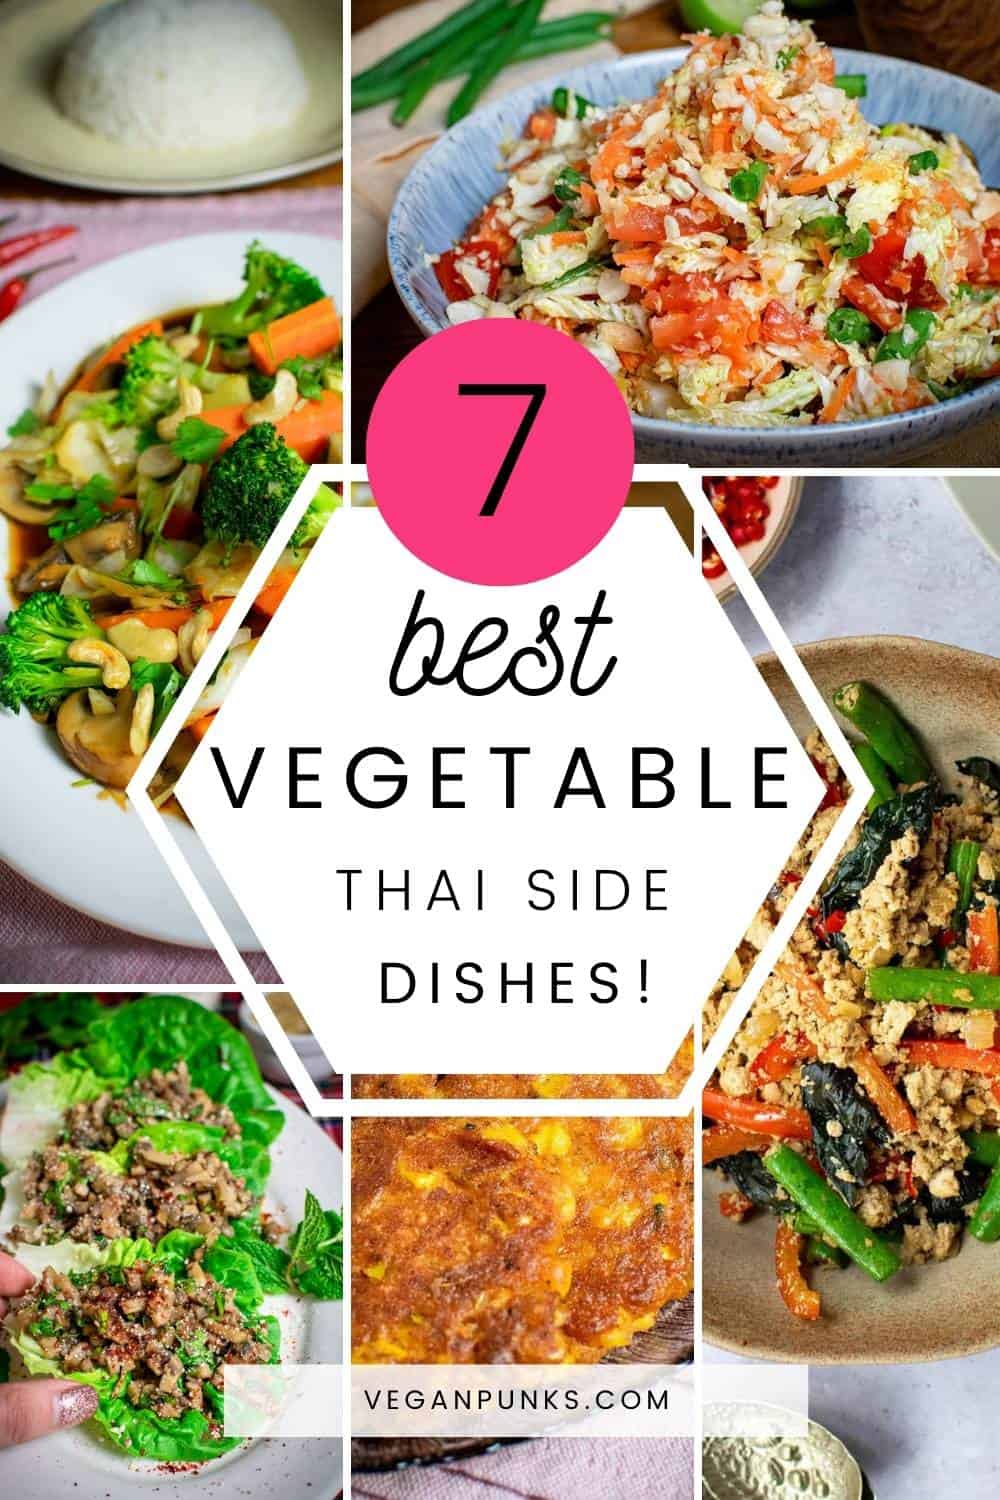 Collage of Thai vegetable side dishes with a title in the middle.